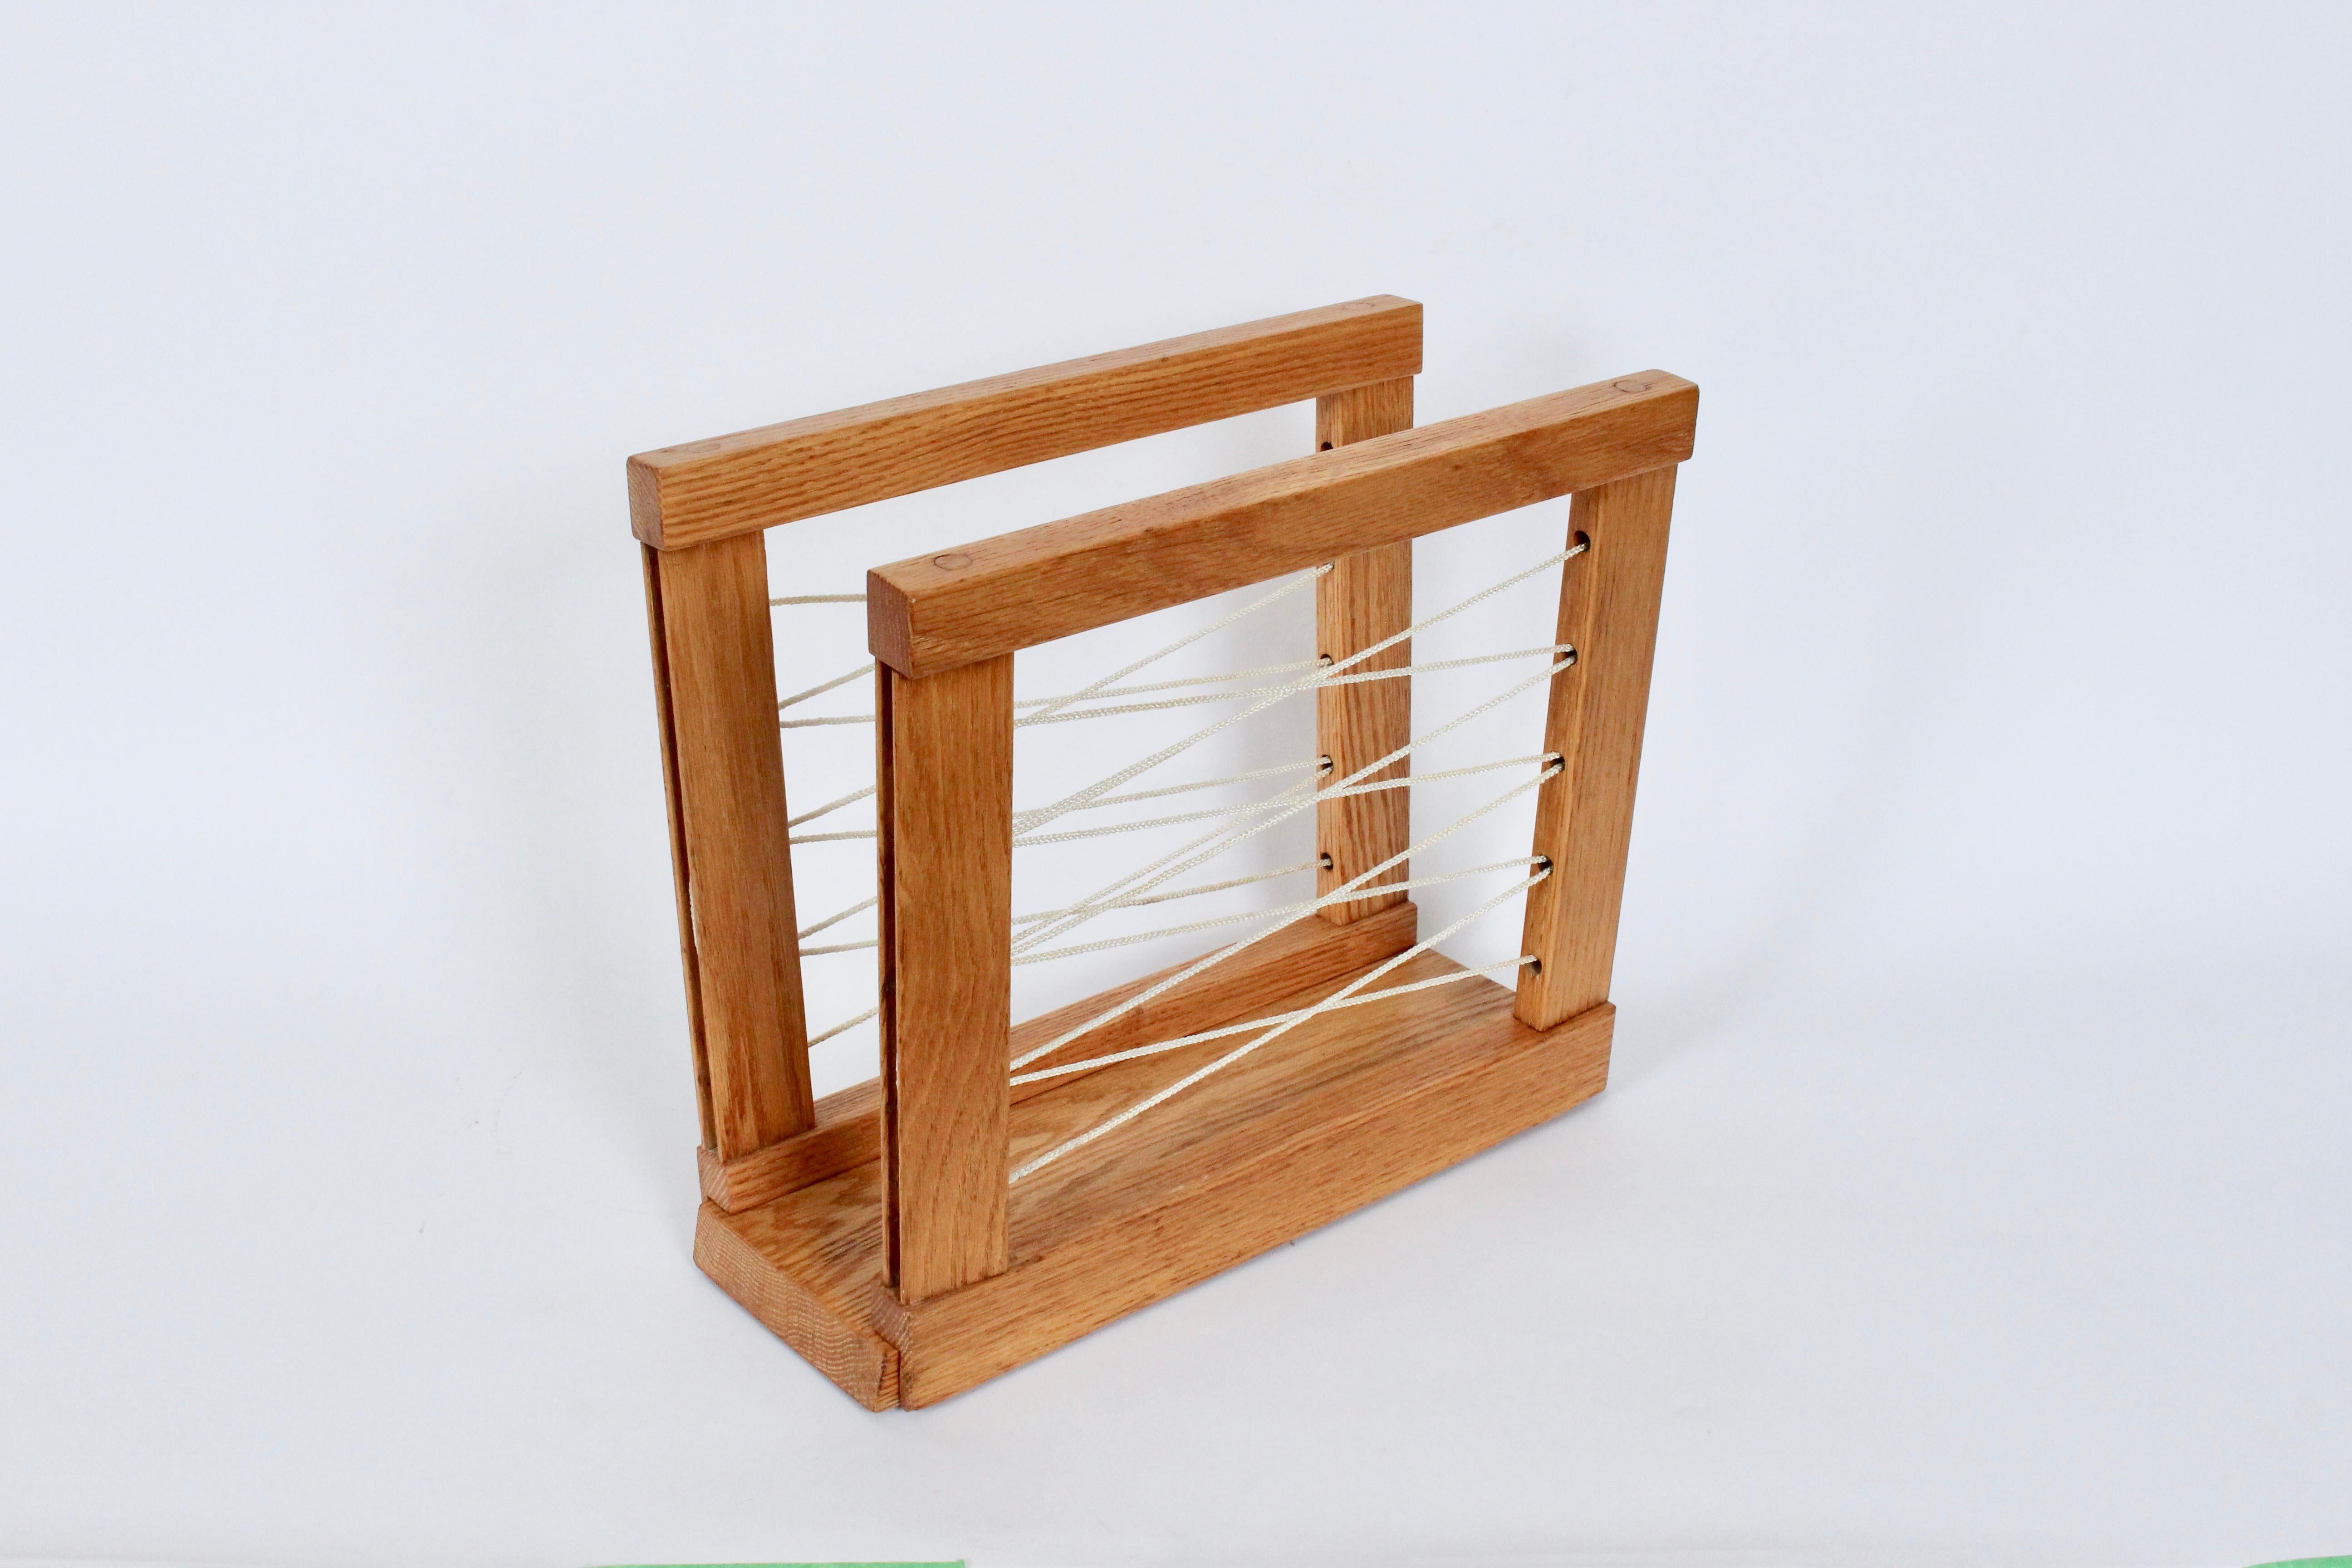 American Modern finely constructed Solid Oak and White Cord Magazine Stand, 1940's. Featuring a narrow and sturdy, handmade rectangular solid Oak framework with taut White Criss Cross Cord supports. Quality manufacturing. Versatile. File Folder.